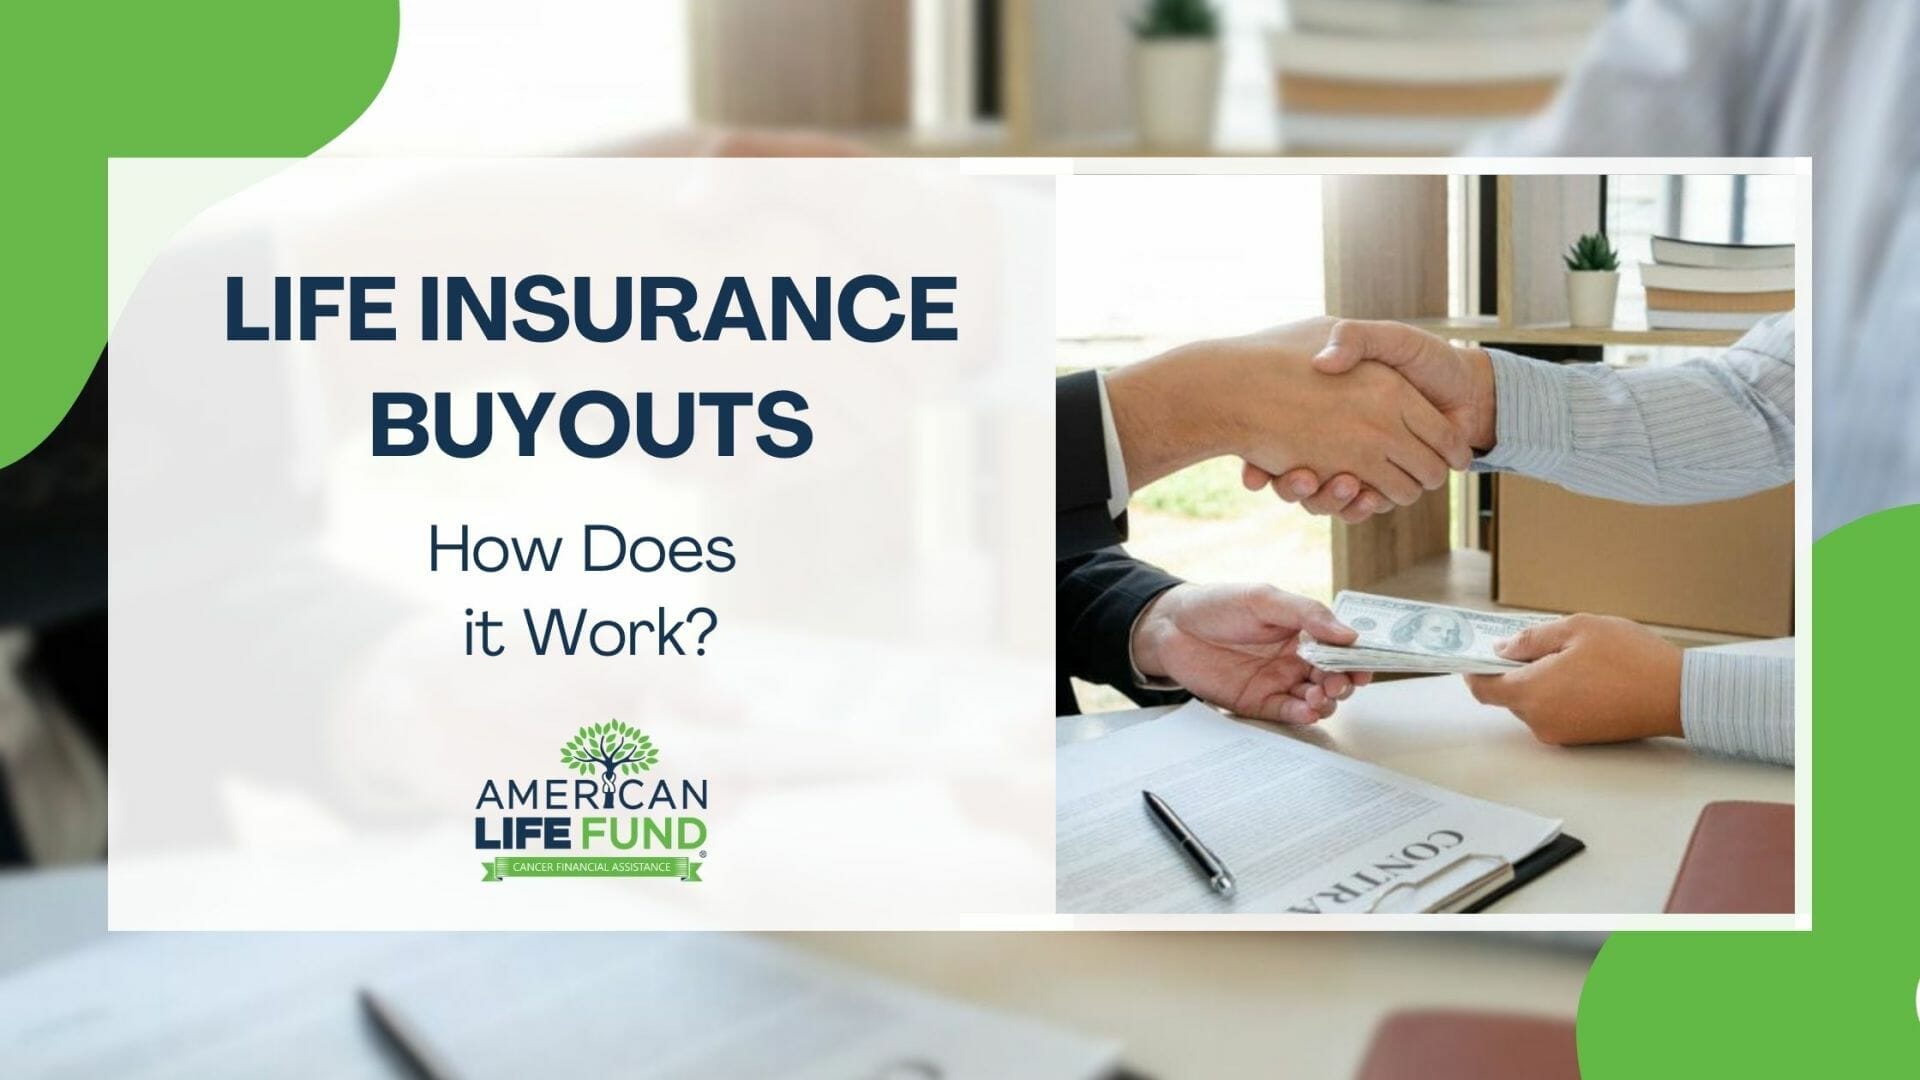 How Does A Life Insurance Buyout Work?